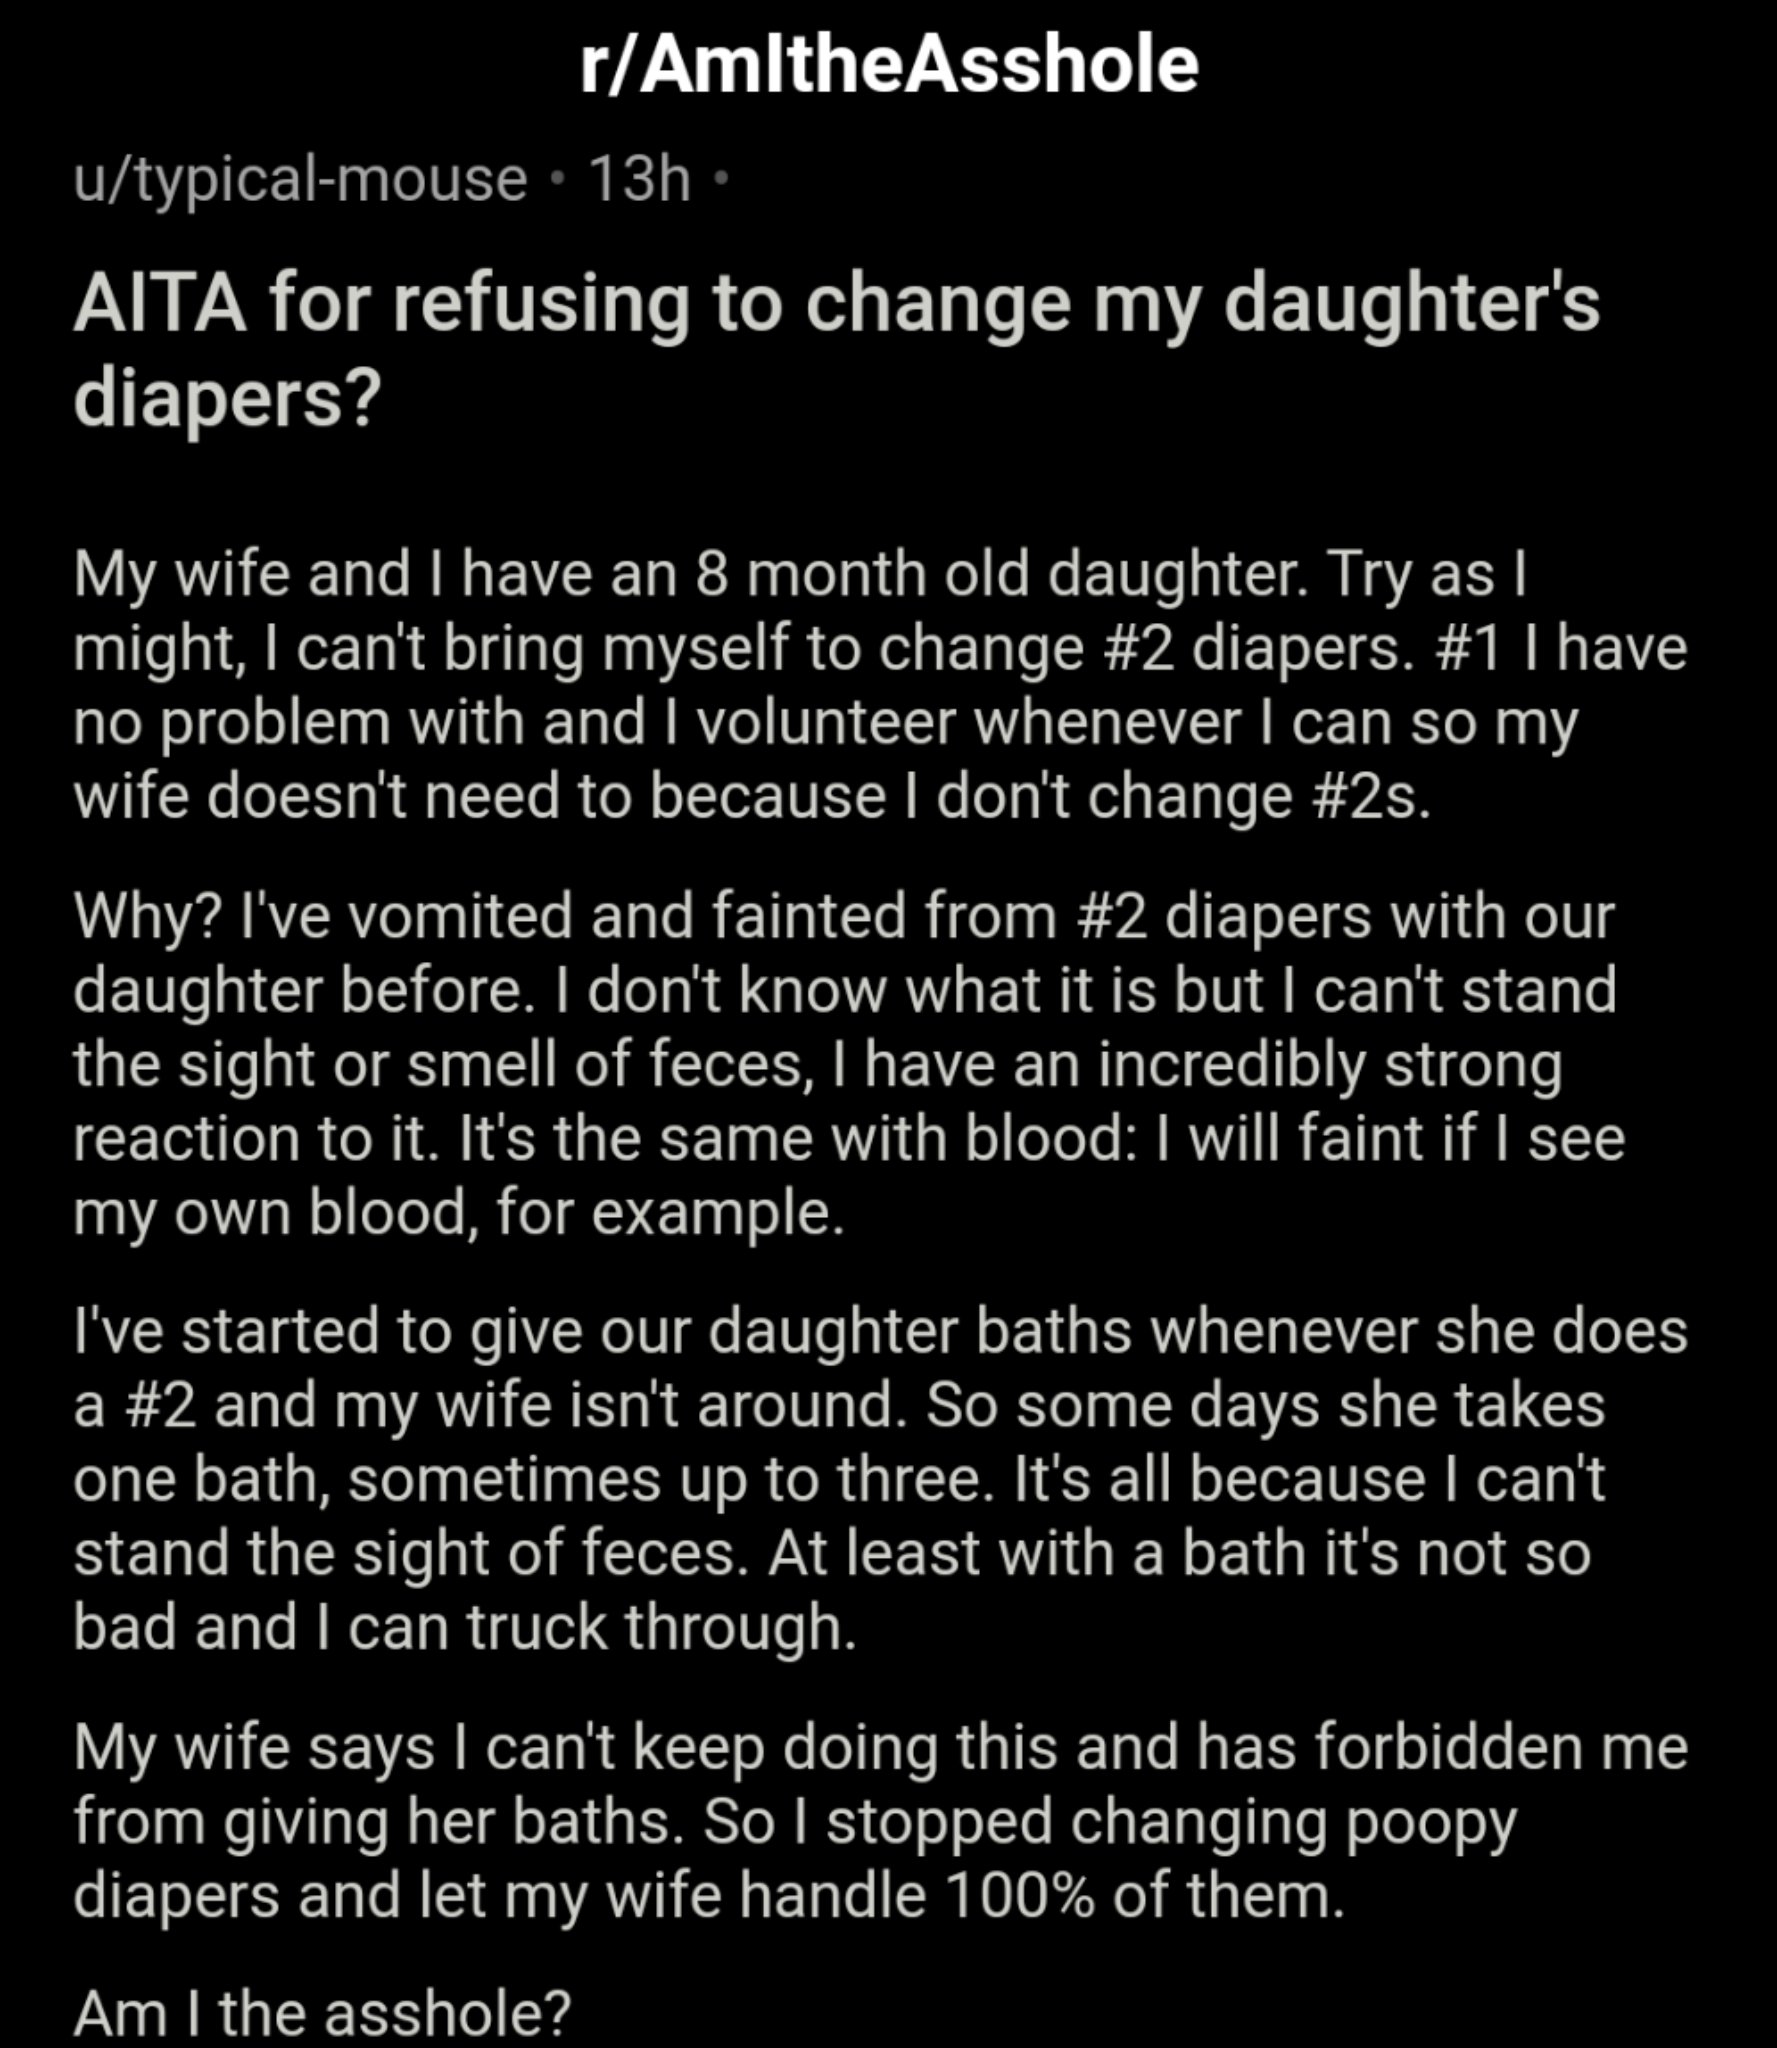 Am I the Asshole? op X AITA for refusing to change my daughters diapers?  pic